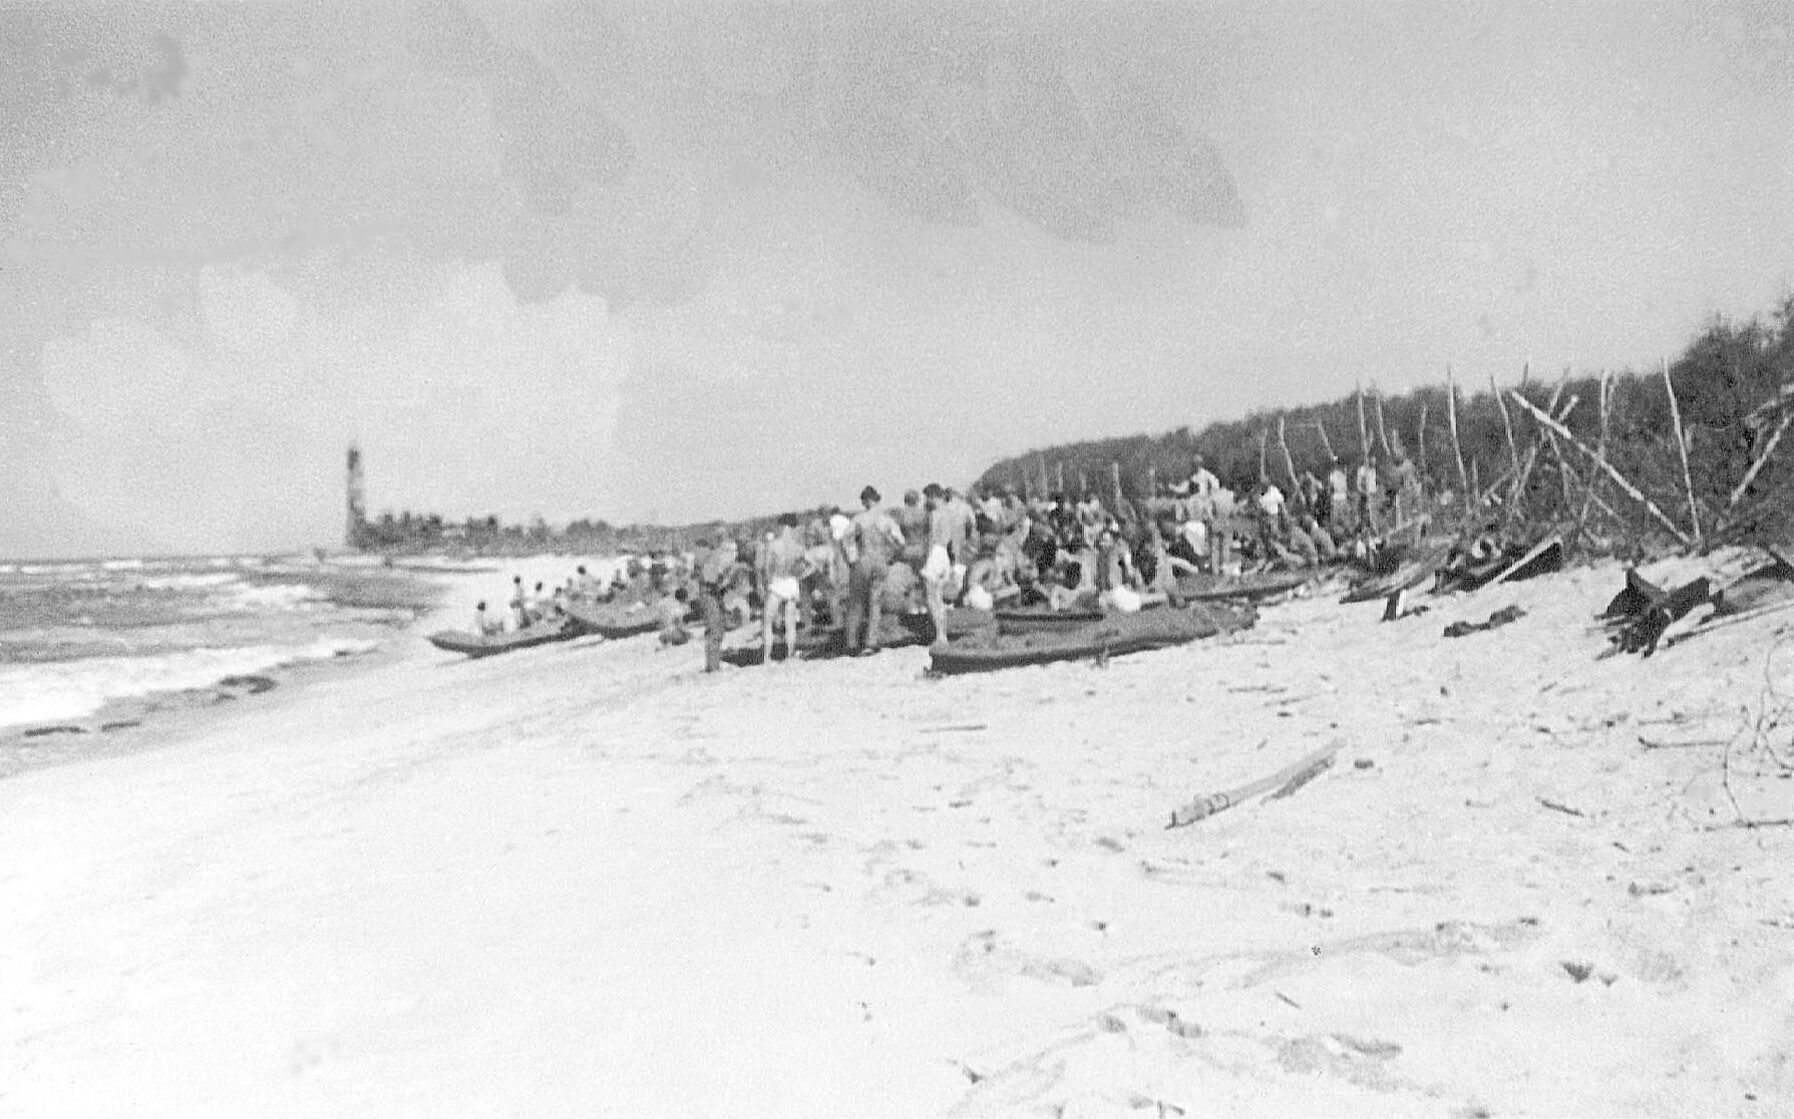 Carlson’s Marine Raiders participate in rigorous training with rubber boats along a Hawaiian beach. A month later, the Raiders were in action on the Japaese-held island of Makin.